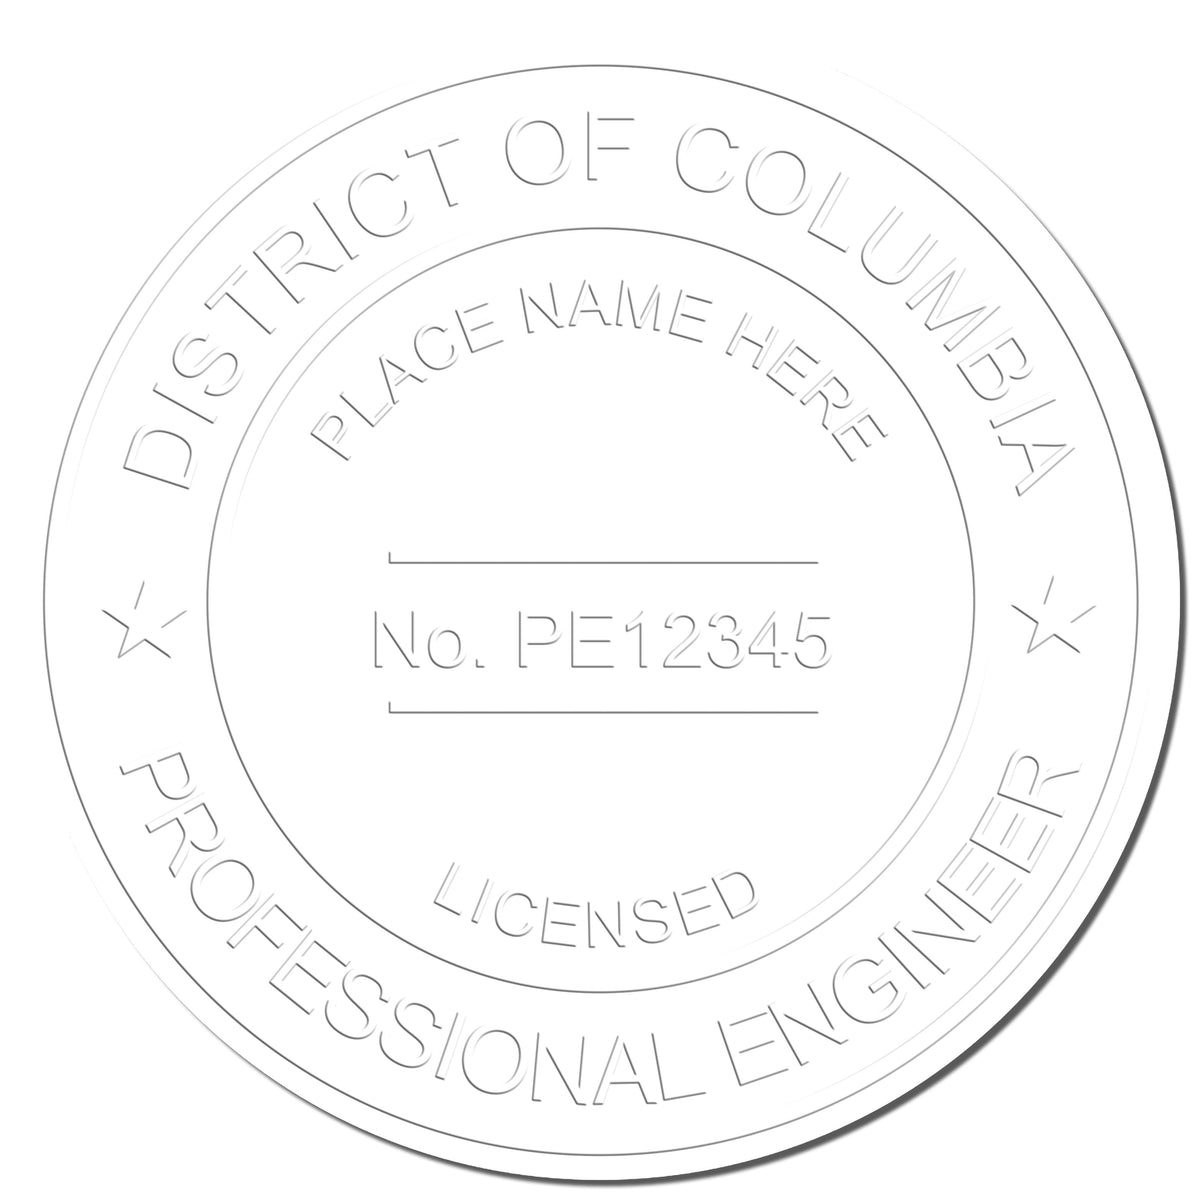 A photograph of the Handheld District of Columbia Professional Engineer Embosser stamp impression reveals a vivid, professional image of the on paper.